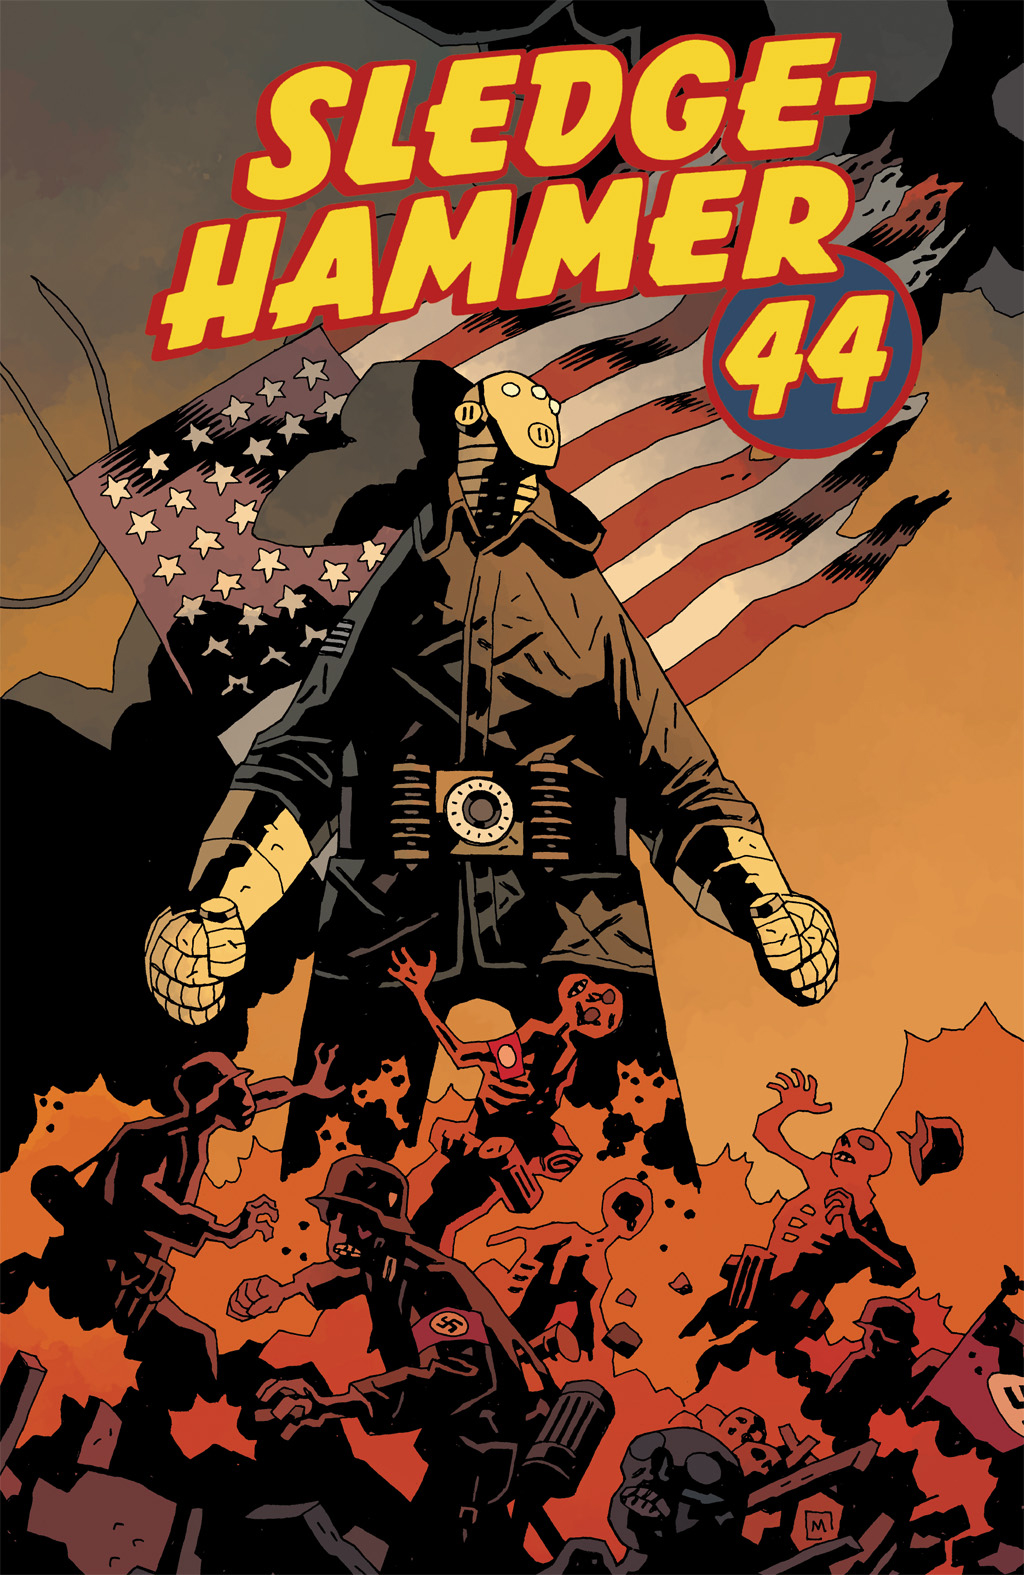 Sledgehammer 44 by Mike Mignola